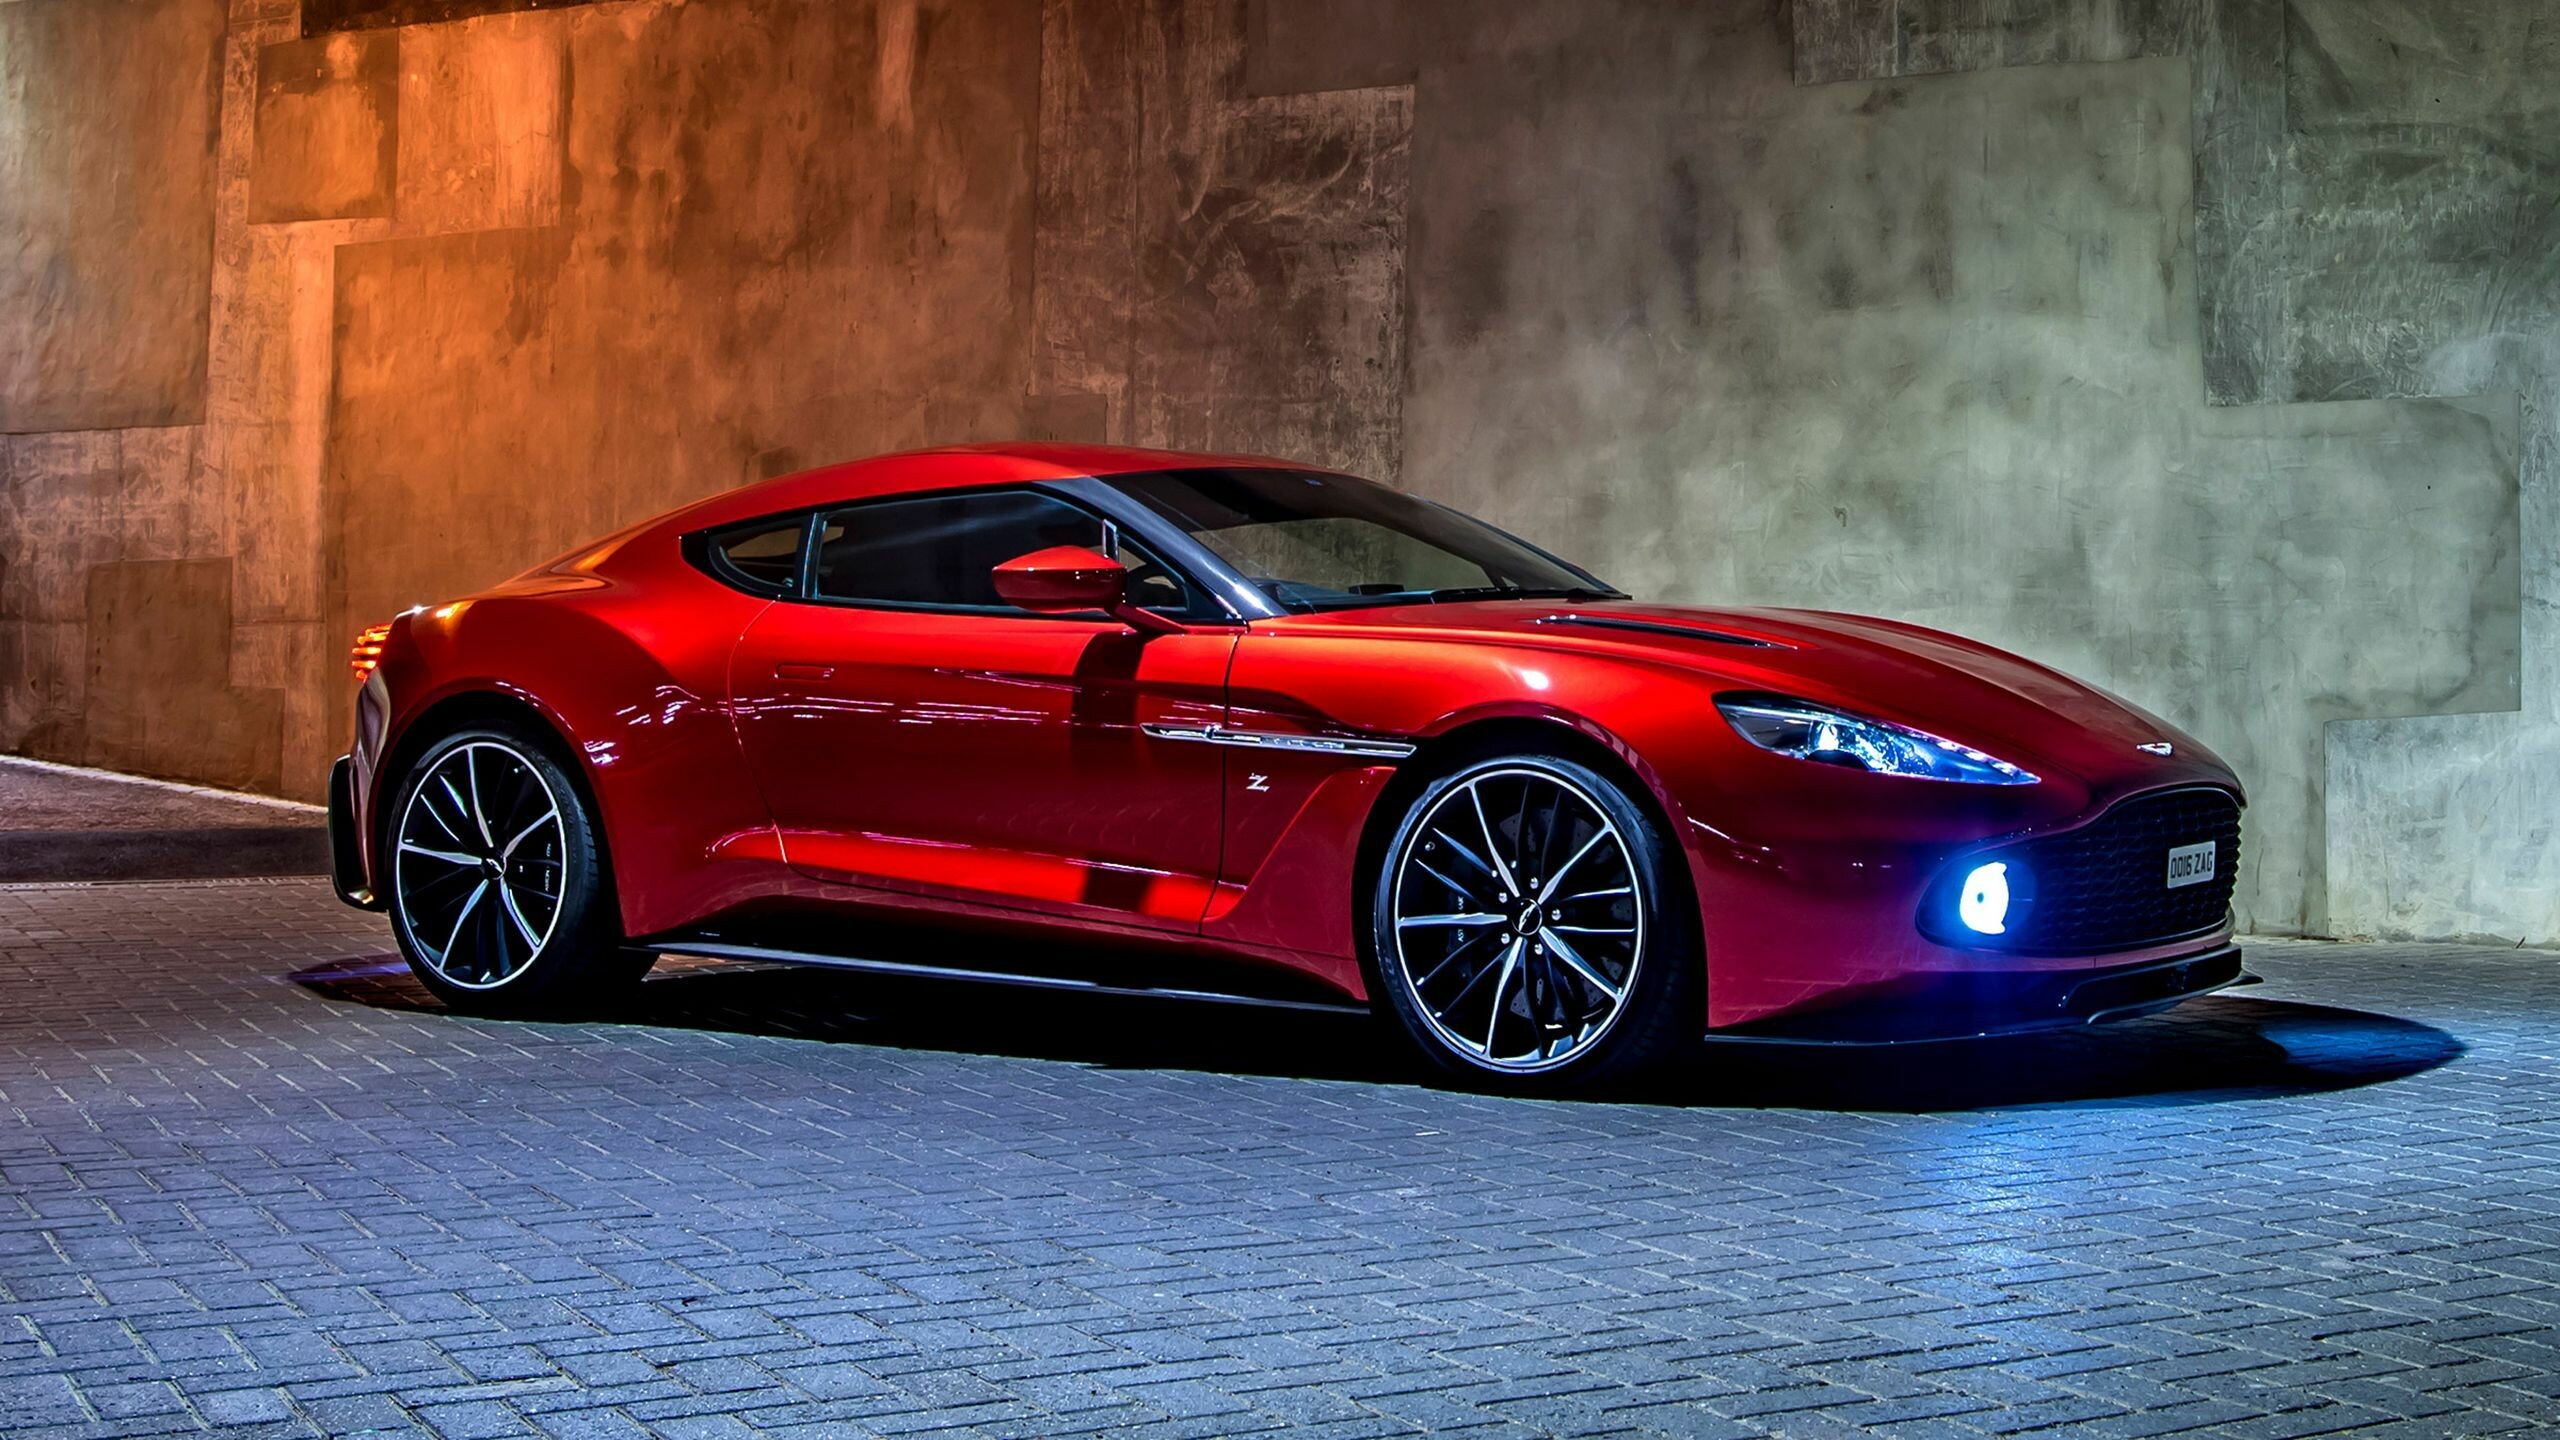 Aston Martin: Vanquish, A high-performance grand tourer introduced by British luxury automobile manufacturer in 2001. 2560x1440 HD Background.